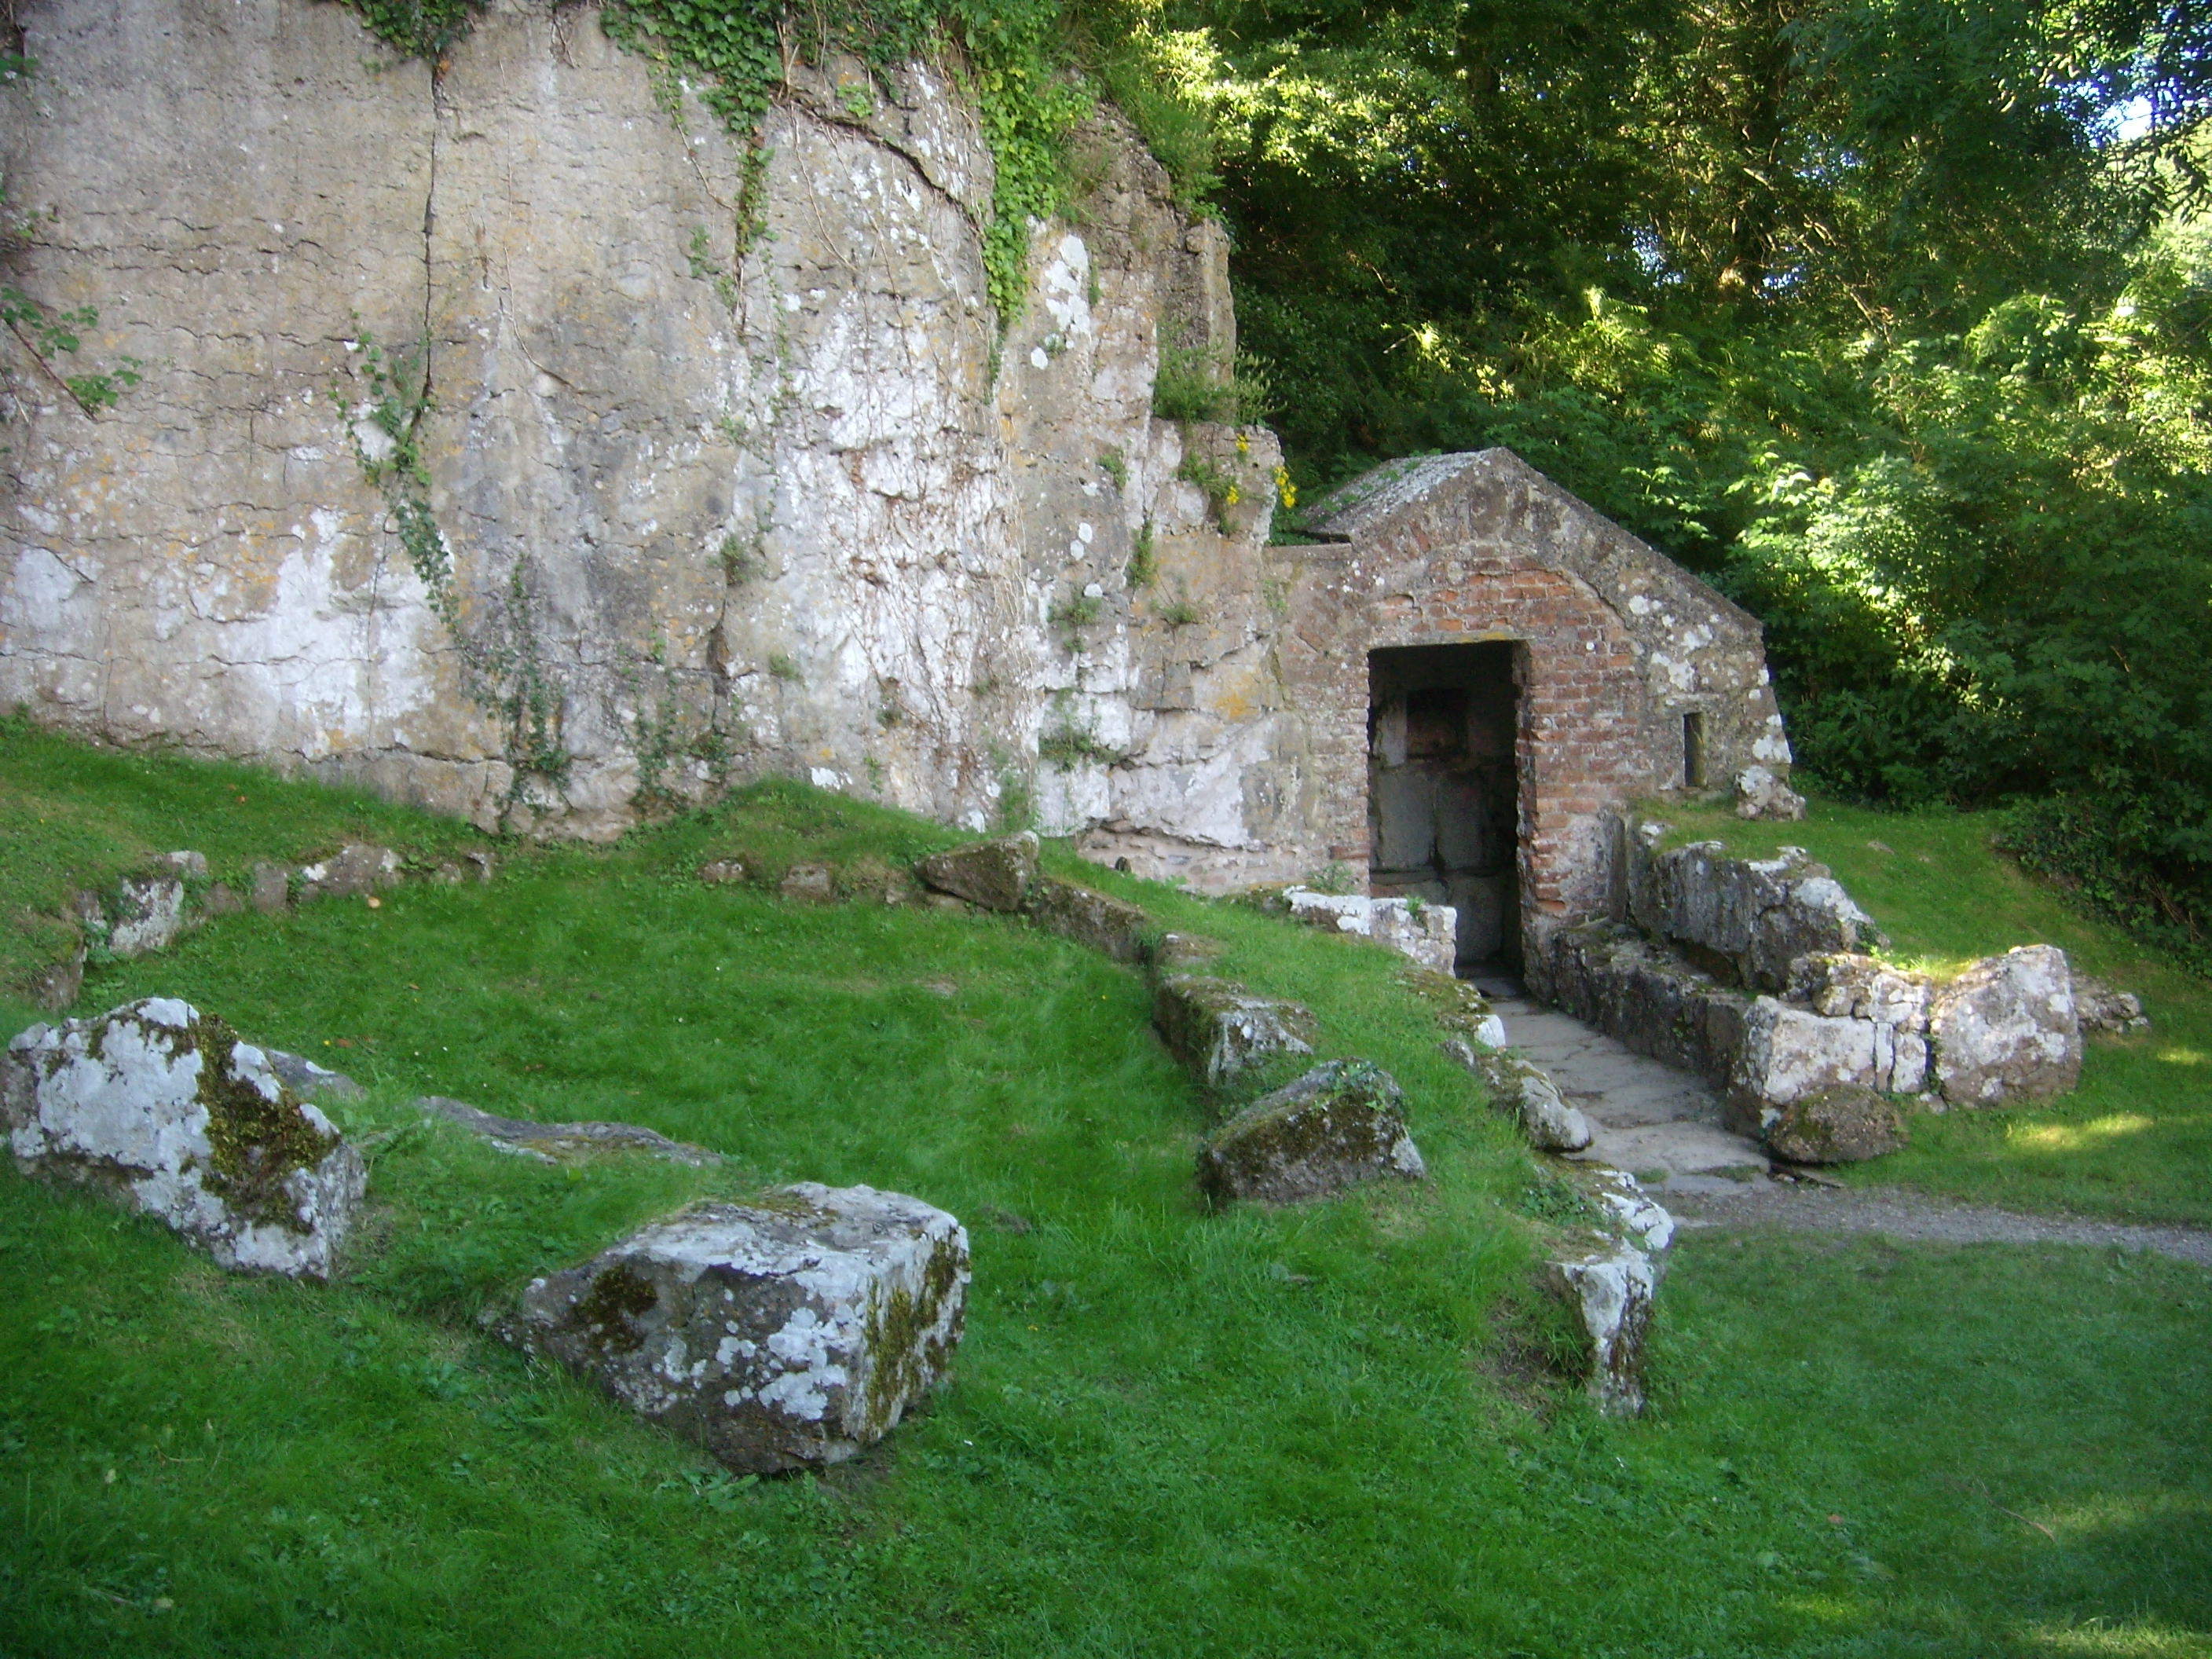 An early celtic christian chapel and well. I bathed to be cleansed & honour the ancient sacredness